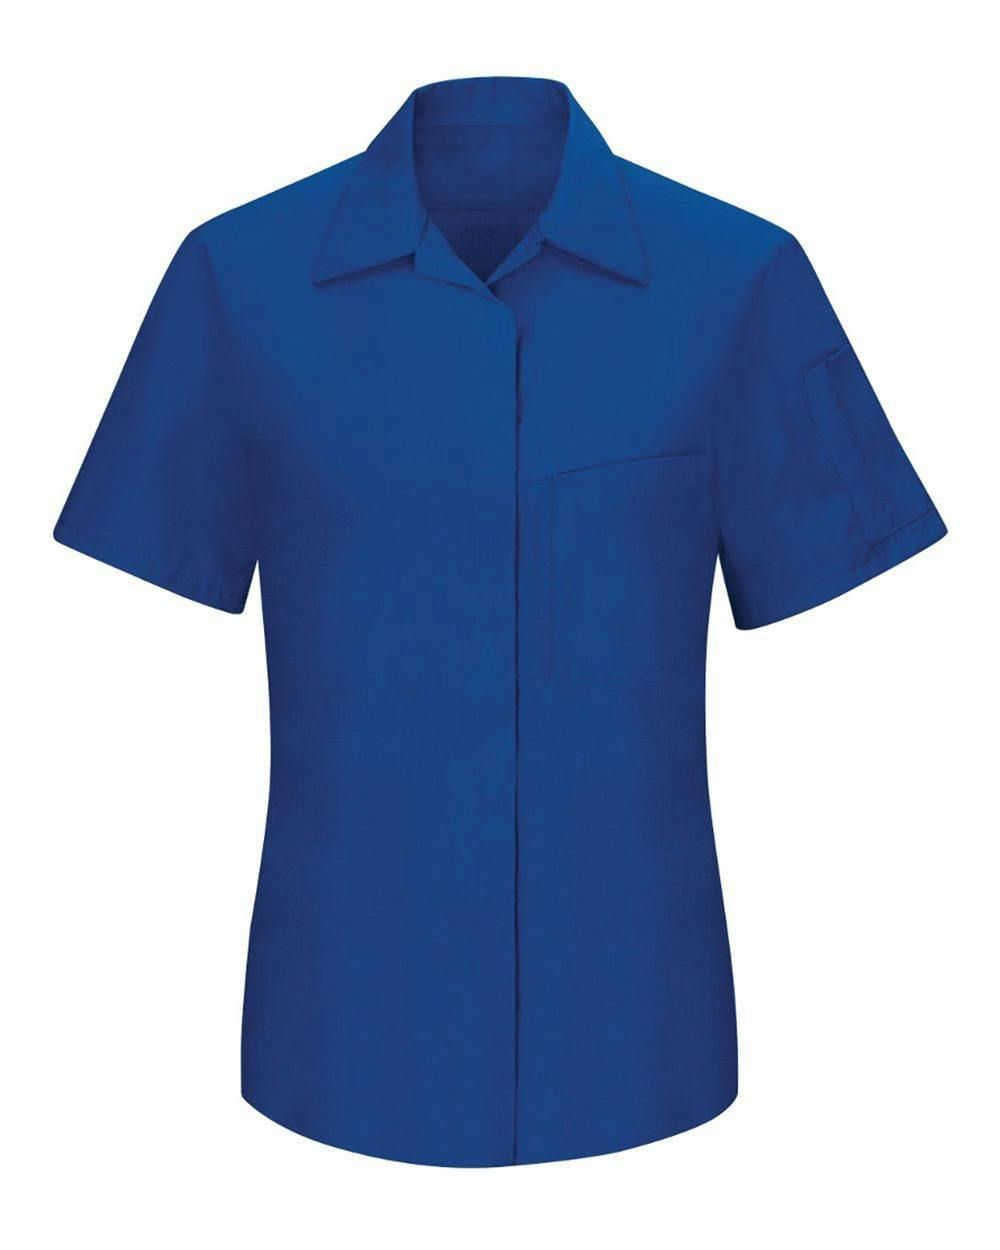 Image for Women's Performance Plus Short Sleeve Shop Shirt with Oilblok Technology - SY41